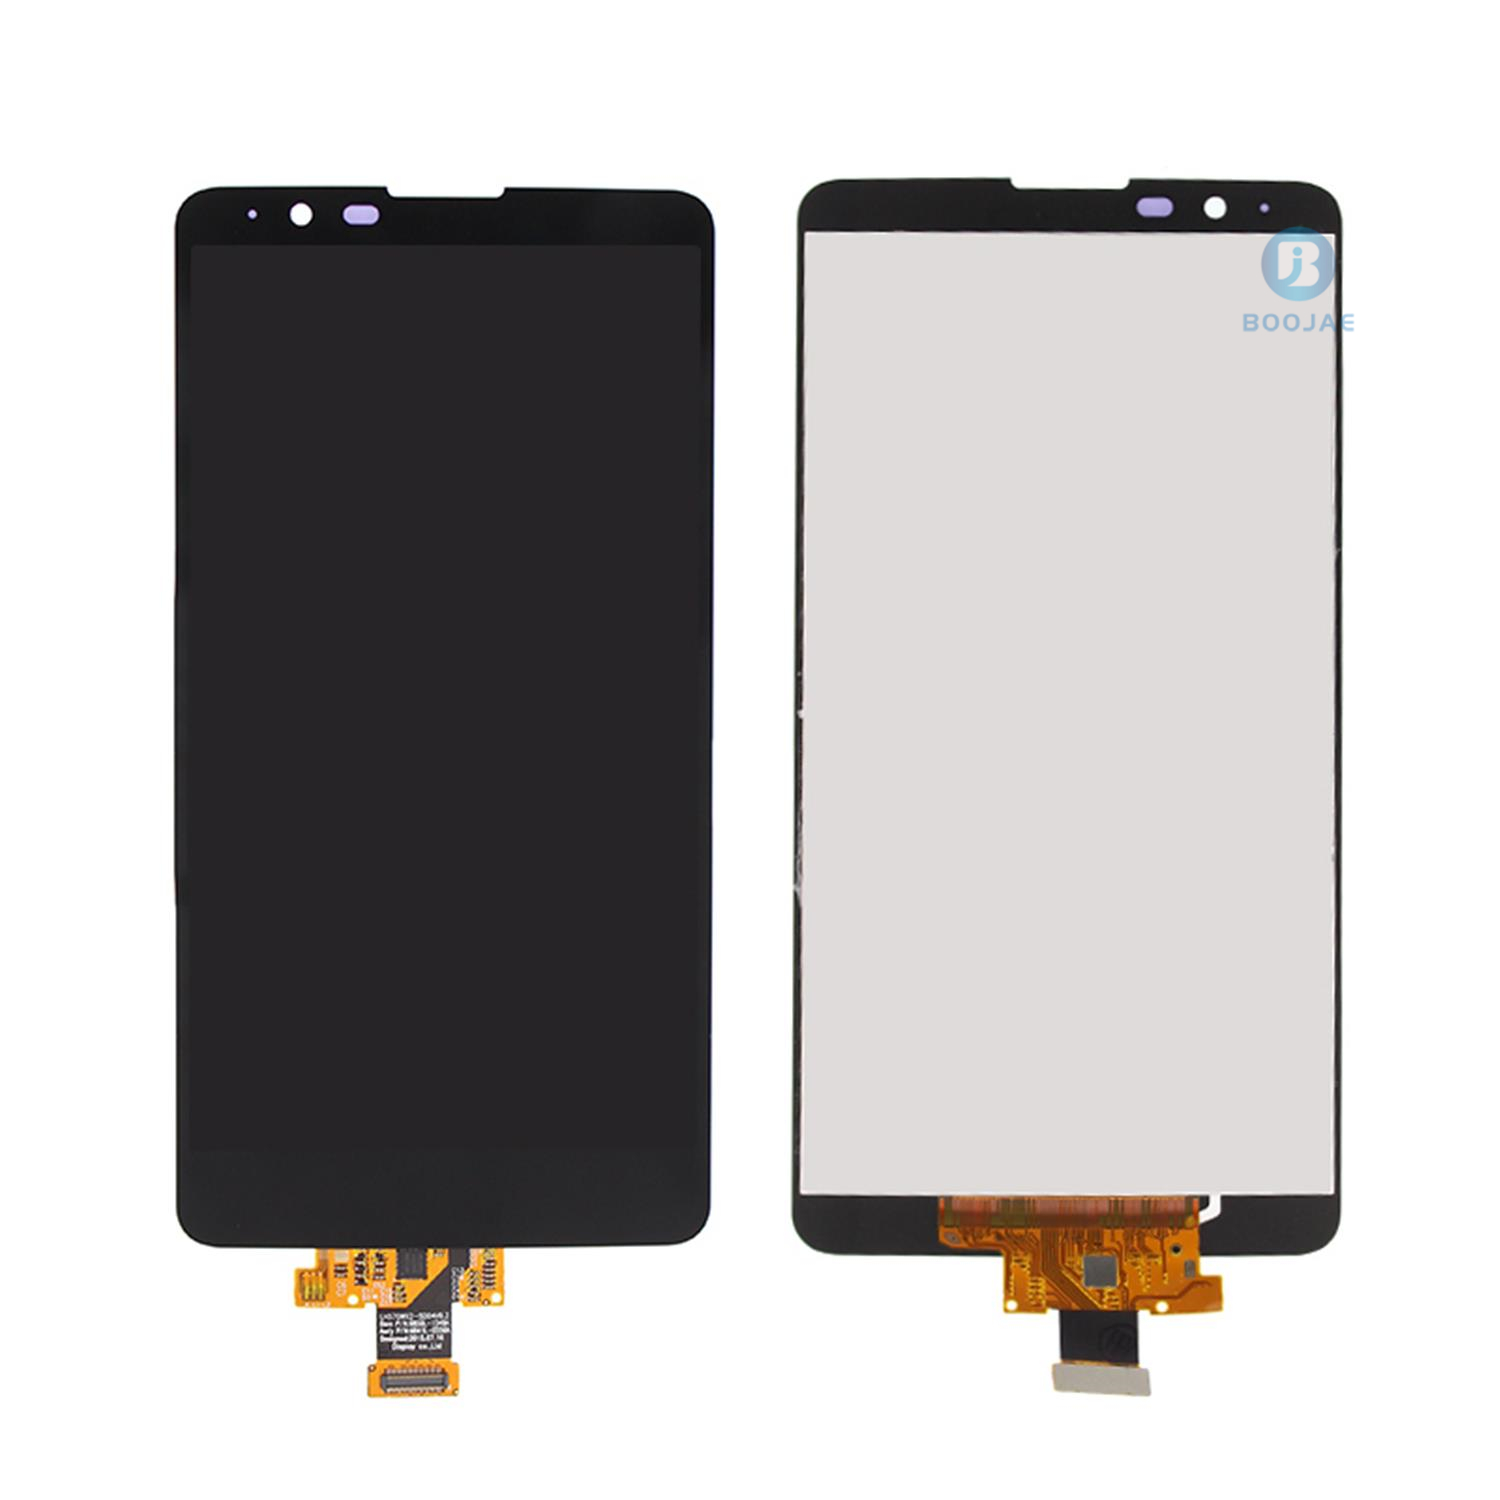 LG LS775 LCD Screen Display, Lcd Assembly Replacement